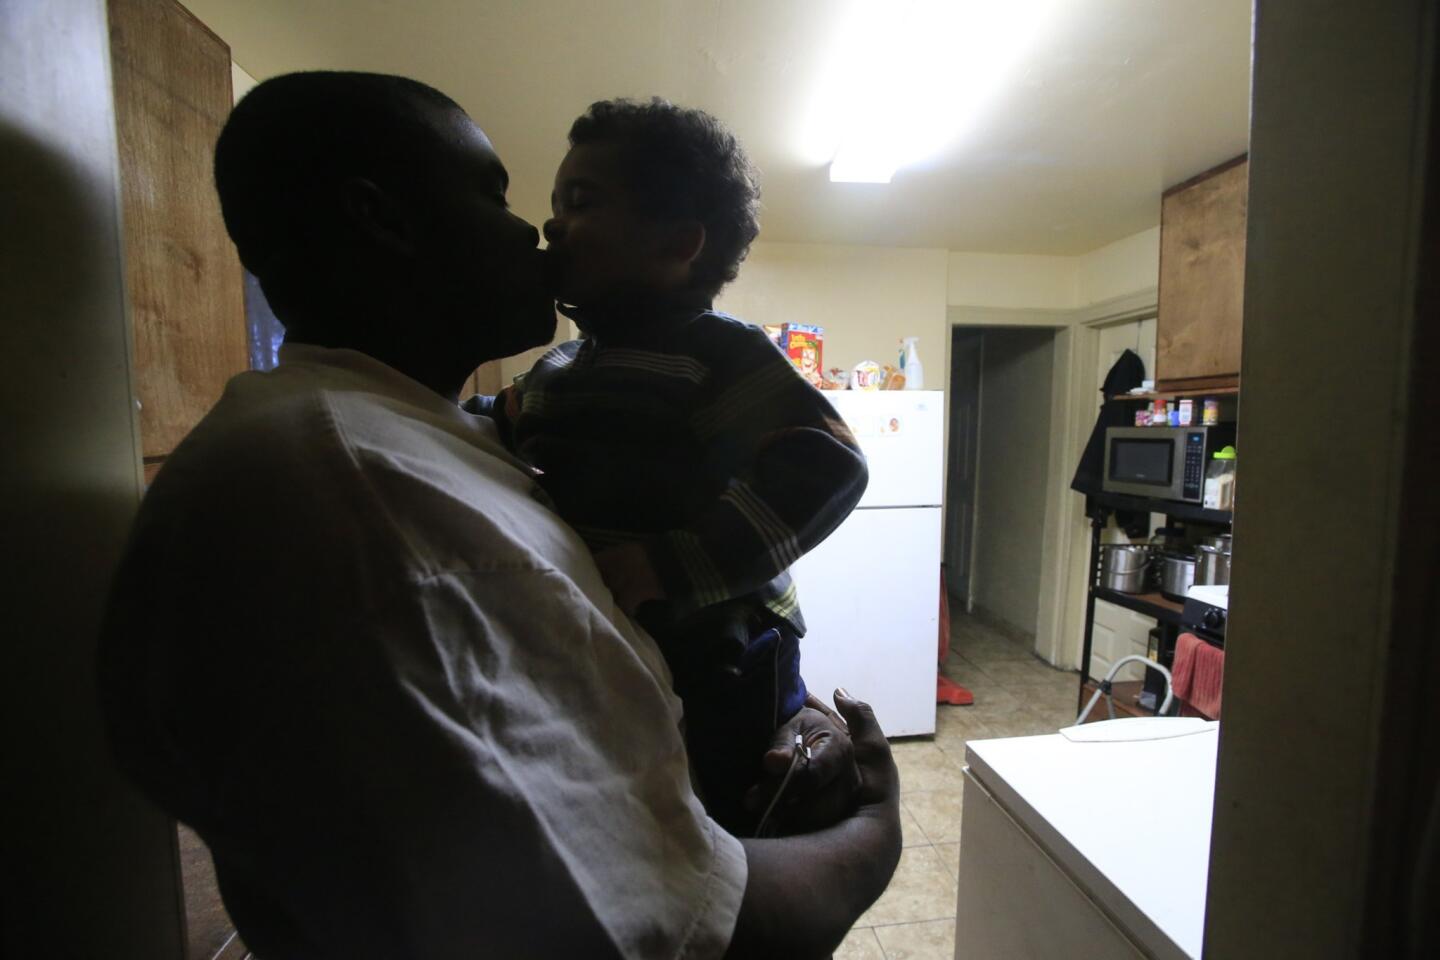 Shortly after sunrise, Bryan August-Jones gives his youngest son, Jonathan, a kiss in the kitchen of their Watts home. August-Jones wakes before dawn each weekday to get his his three sons ready for school and the baby-sitter.